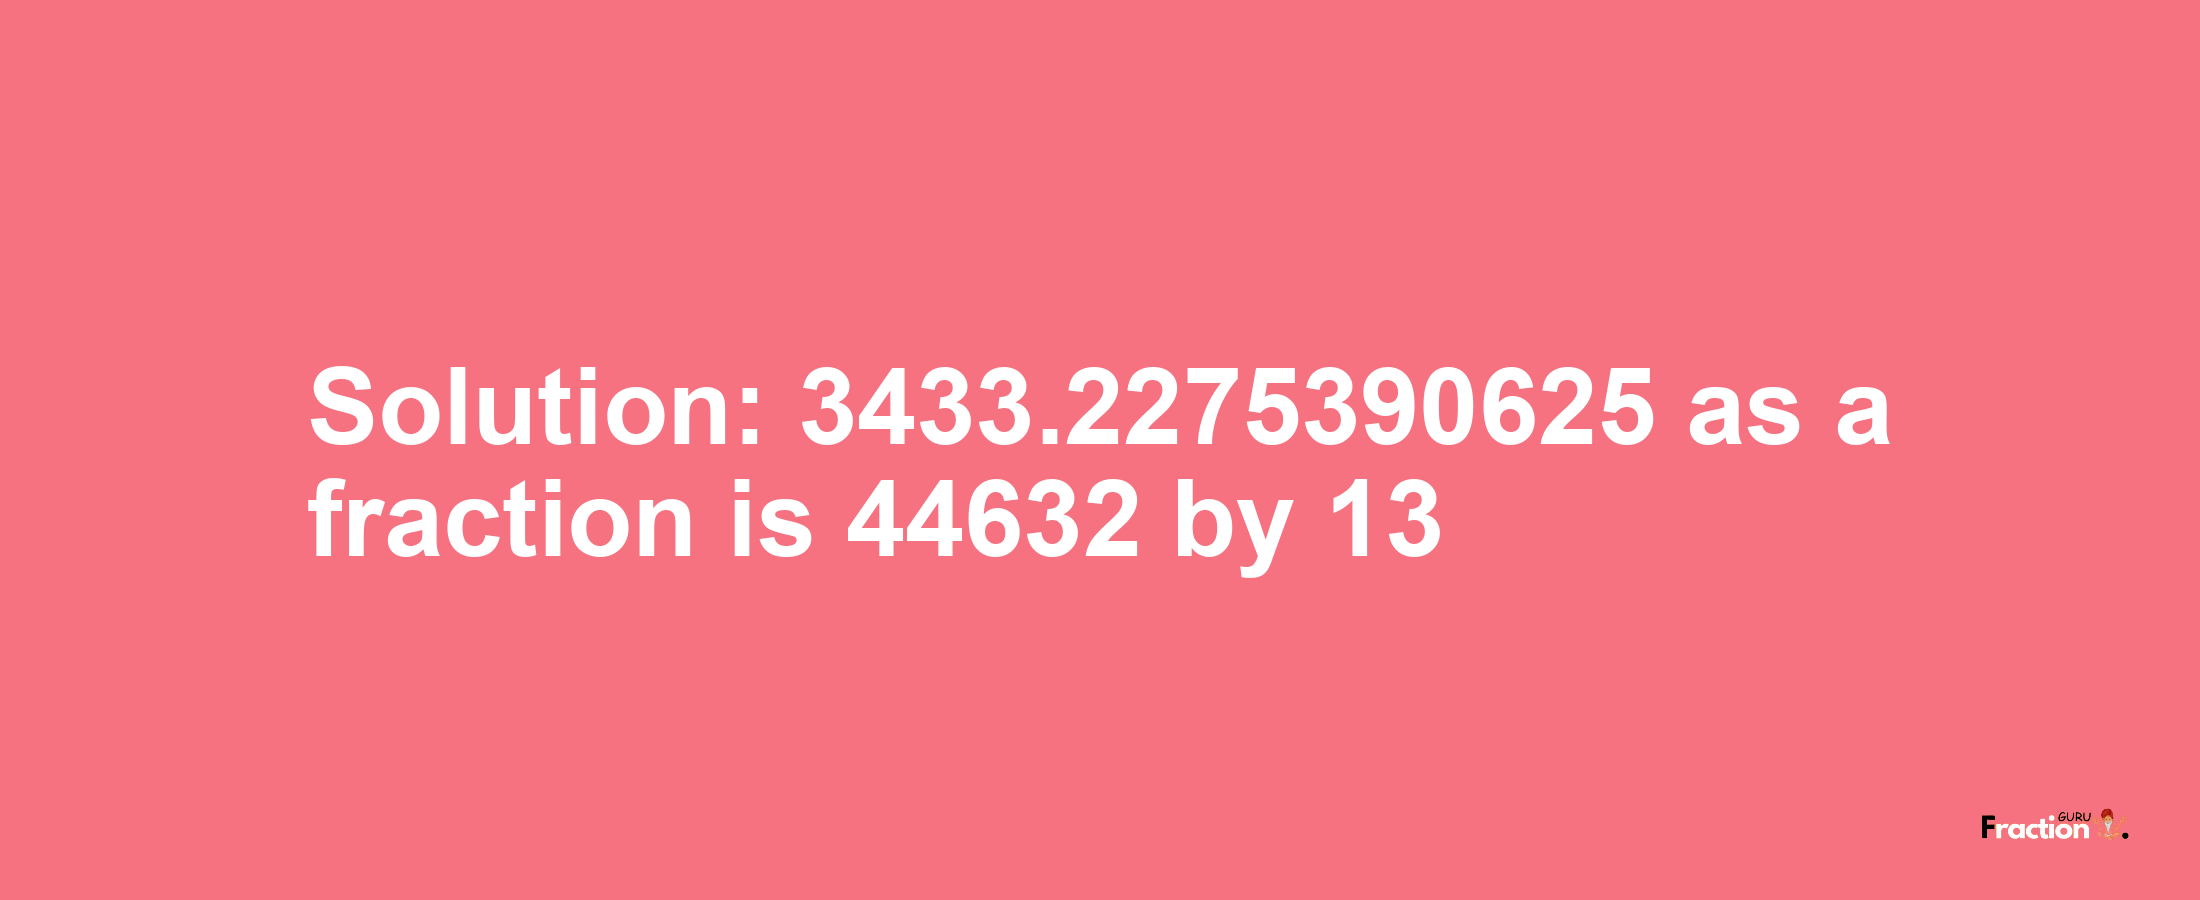 Solution:3433.2275390625 as a fraction is 44632/13